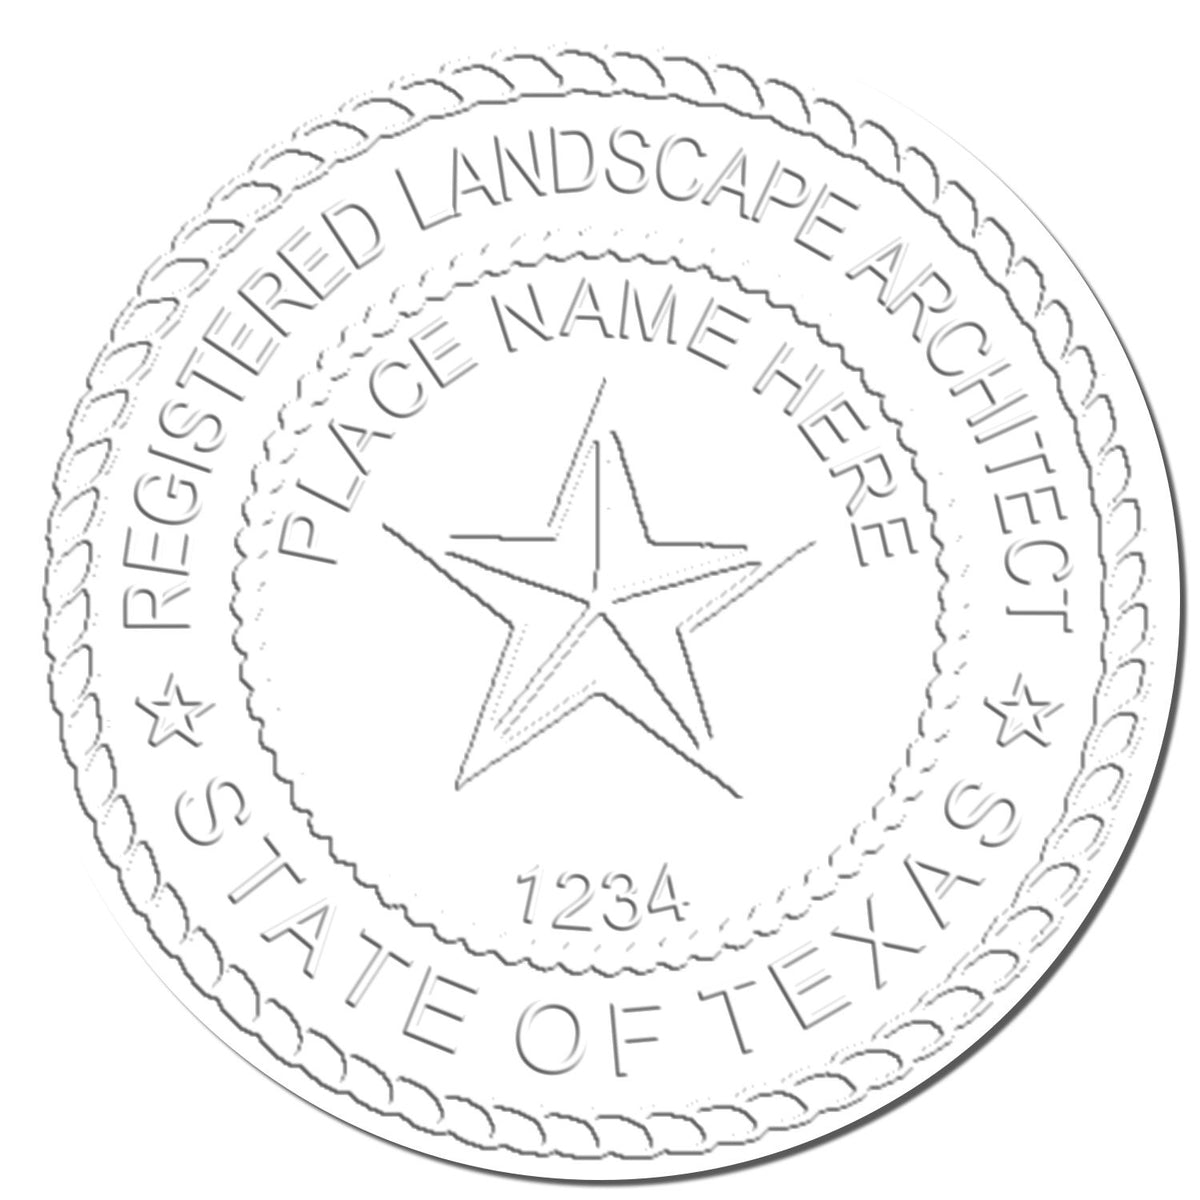 This paper is stamped with a sample imprint of the Gift Texas Landscape Architect Seal, signifying its quality and reliability.